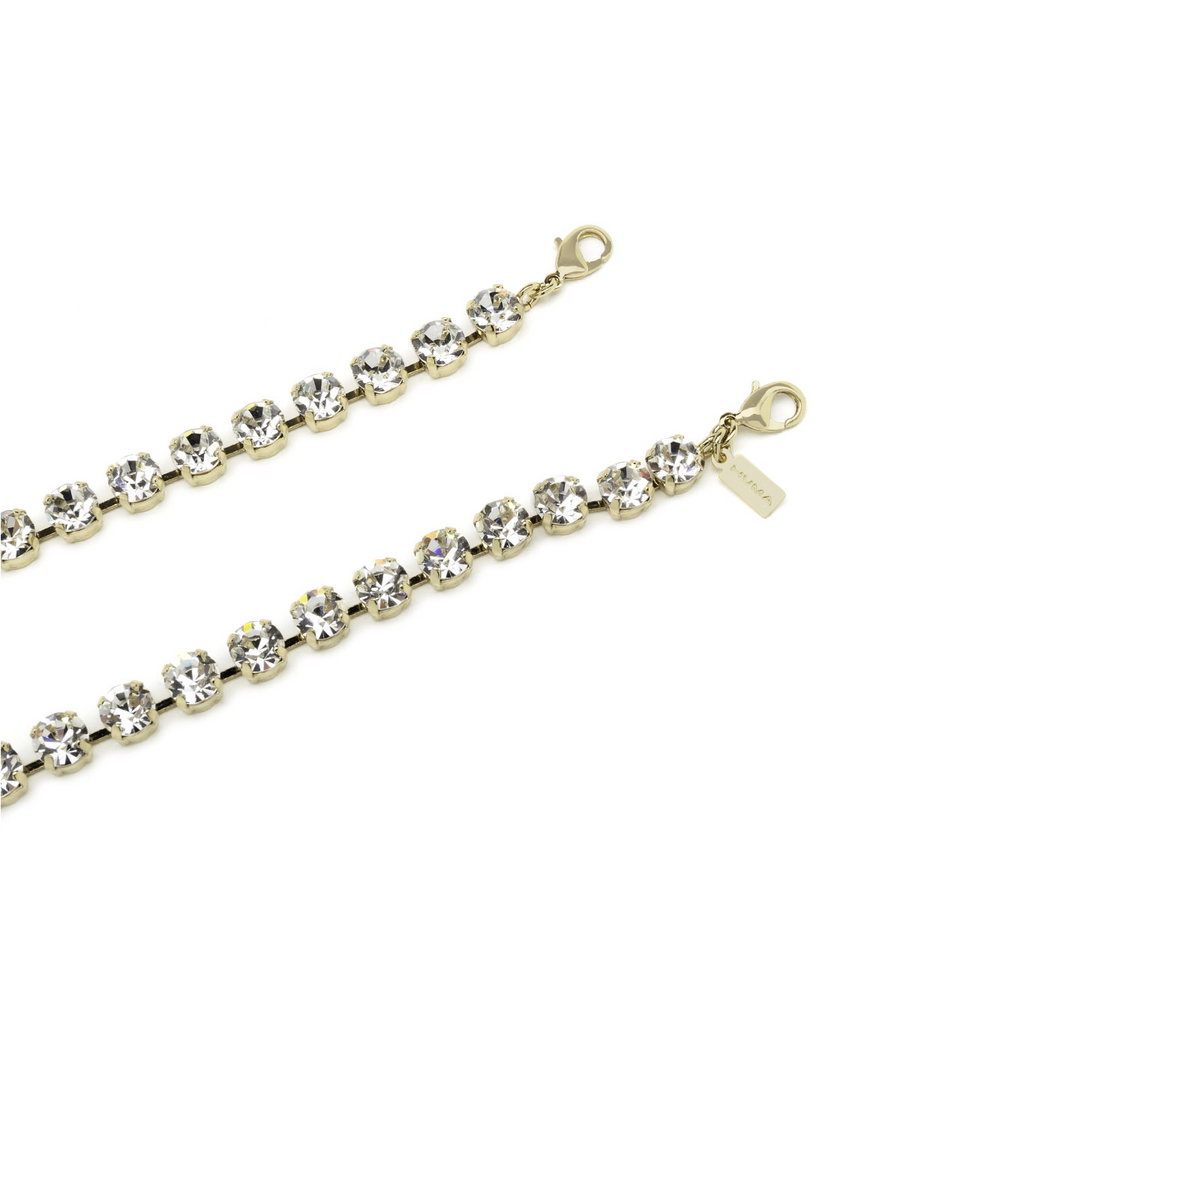 Huma® Accessories: Small Strass Chain color Gold S02 - front view.